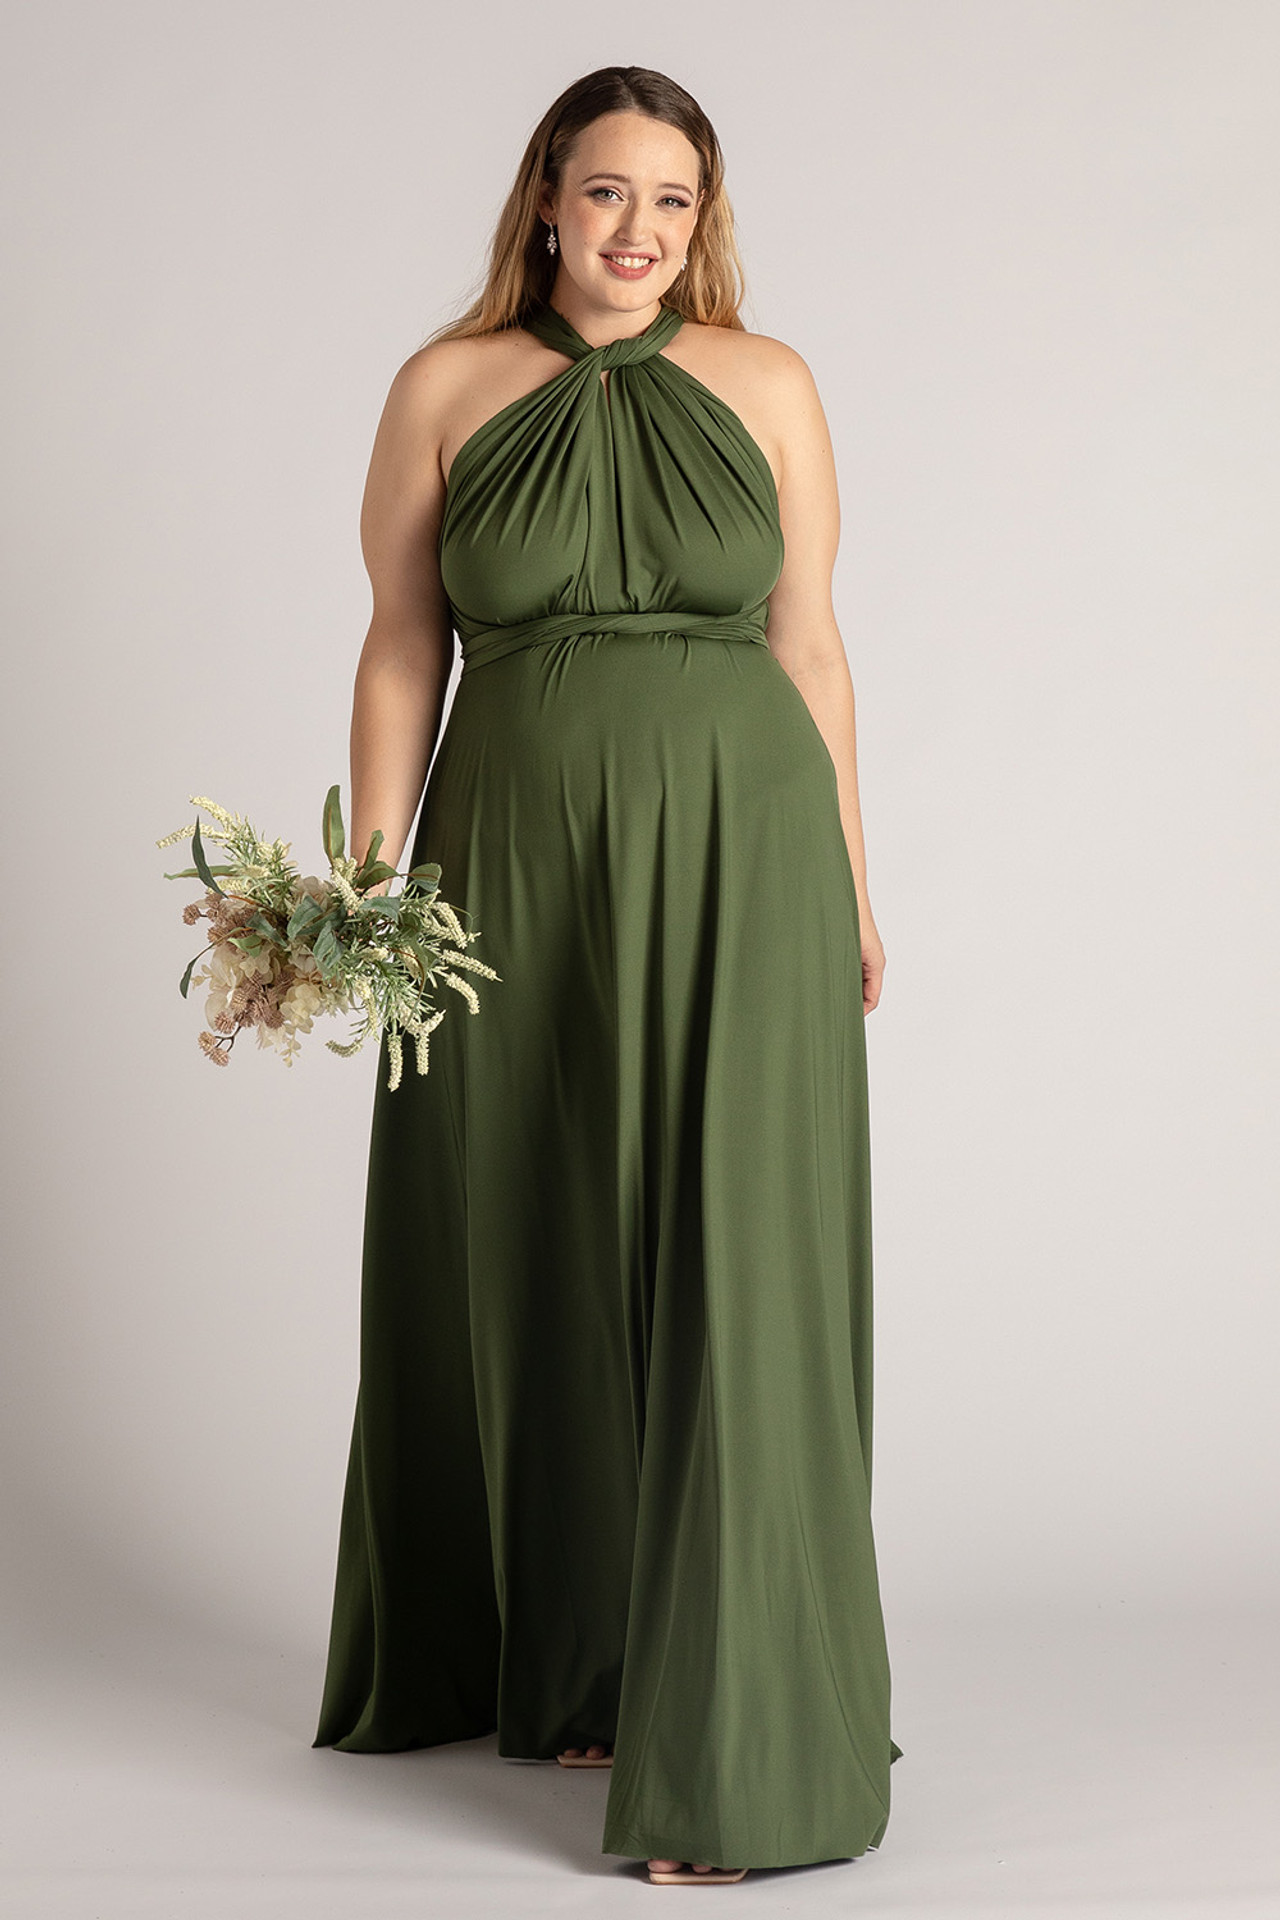 Shop Infinity Dresses - View All Bridesmaid Dresses | Model Chic